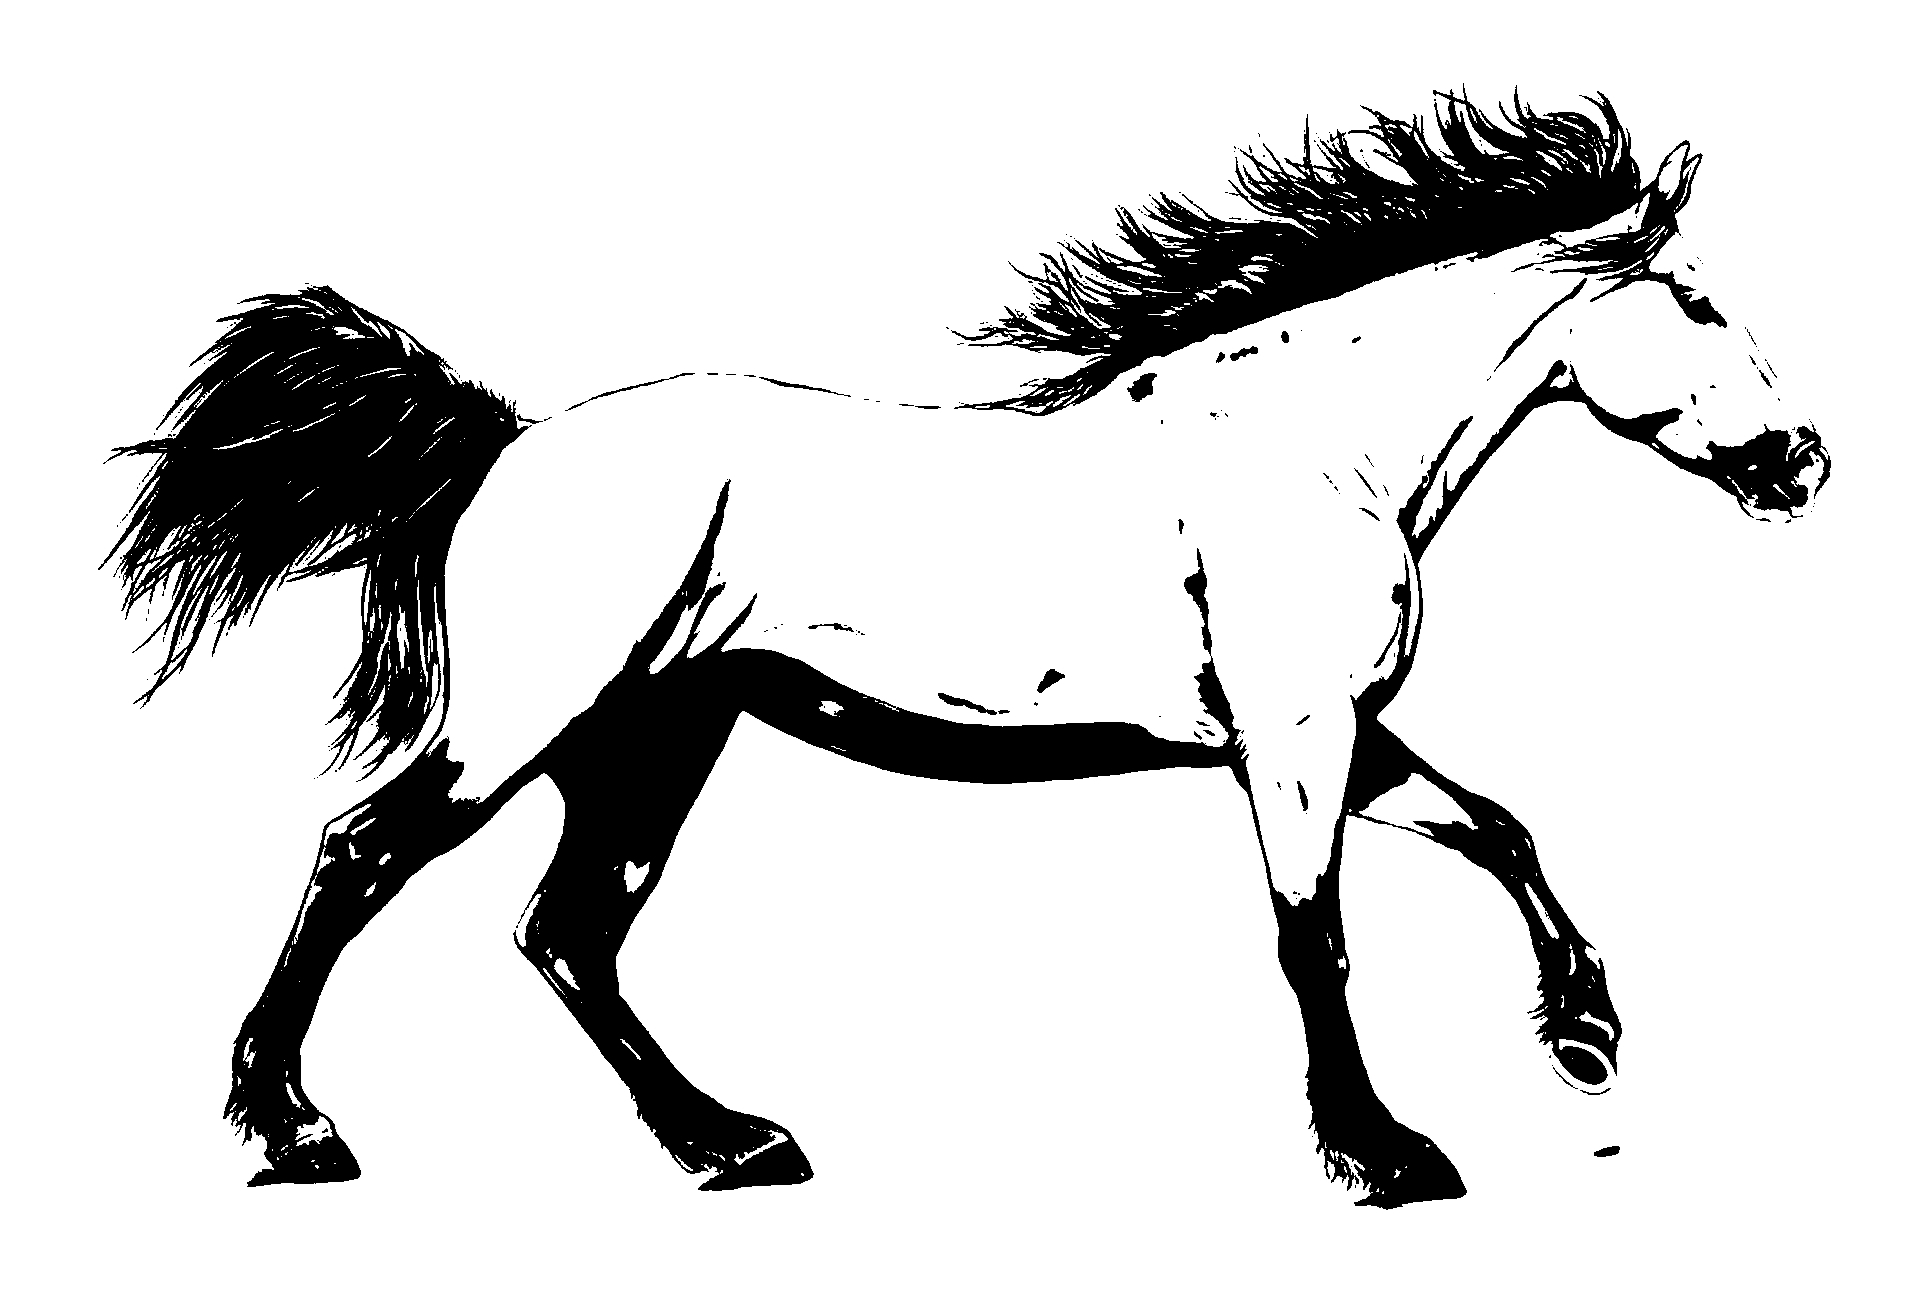 Coloring page of galloping horse